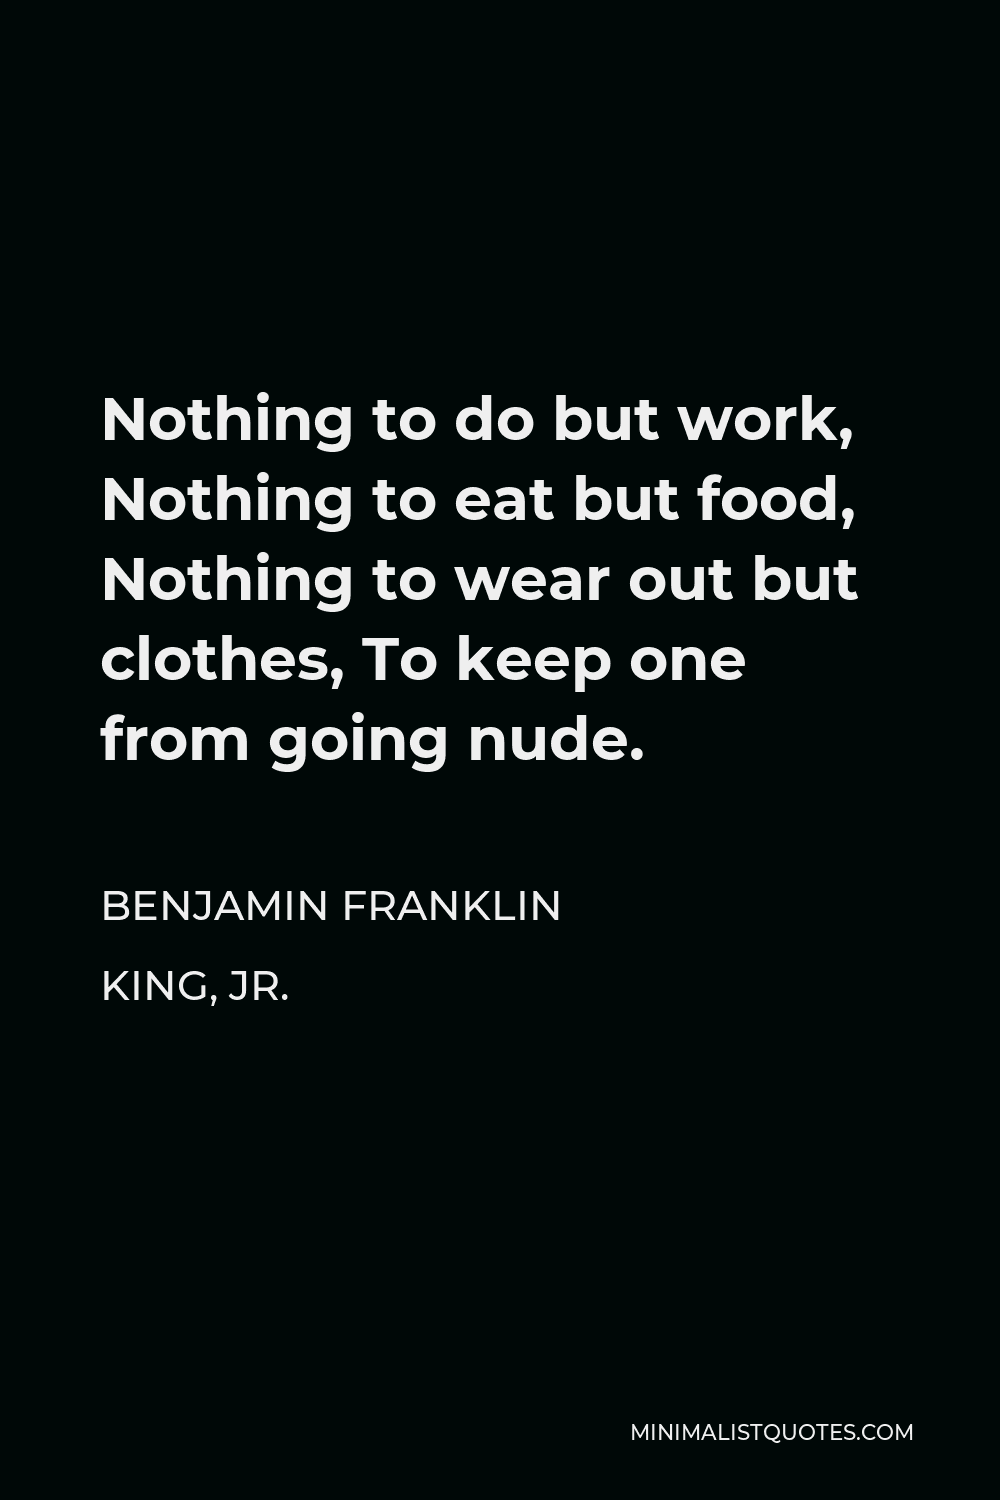 Benjamin Franklin King, Jr. Quote - Nothing to do but work, Nothing to eat but food, Nothing to wear out but clothes, To keep one from going nude.